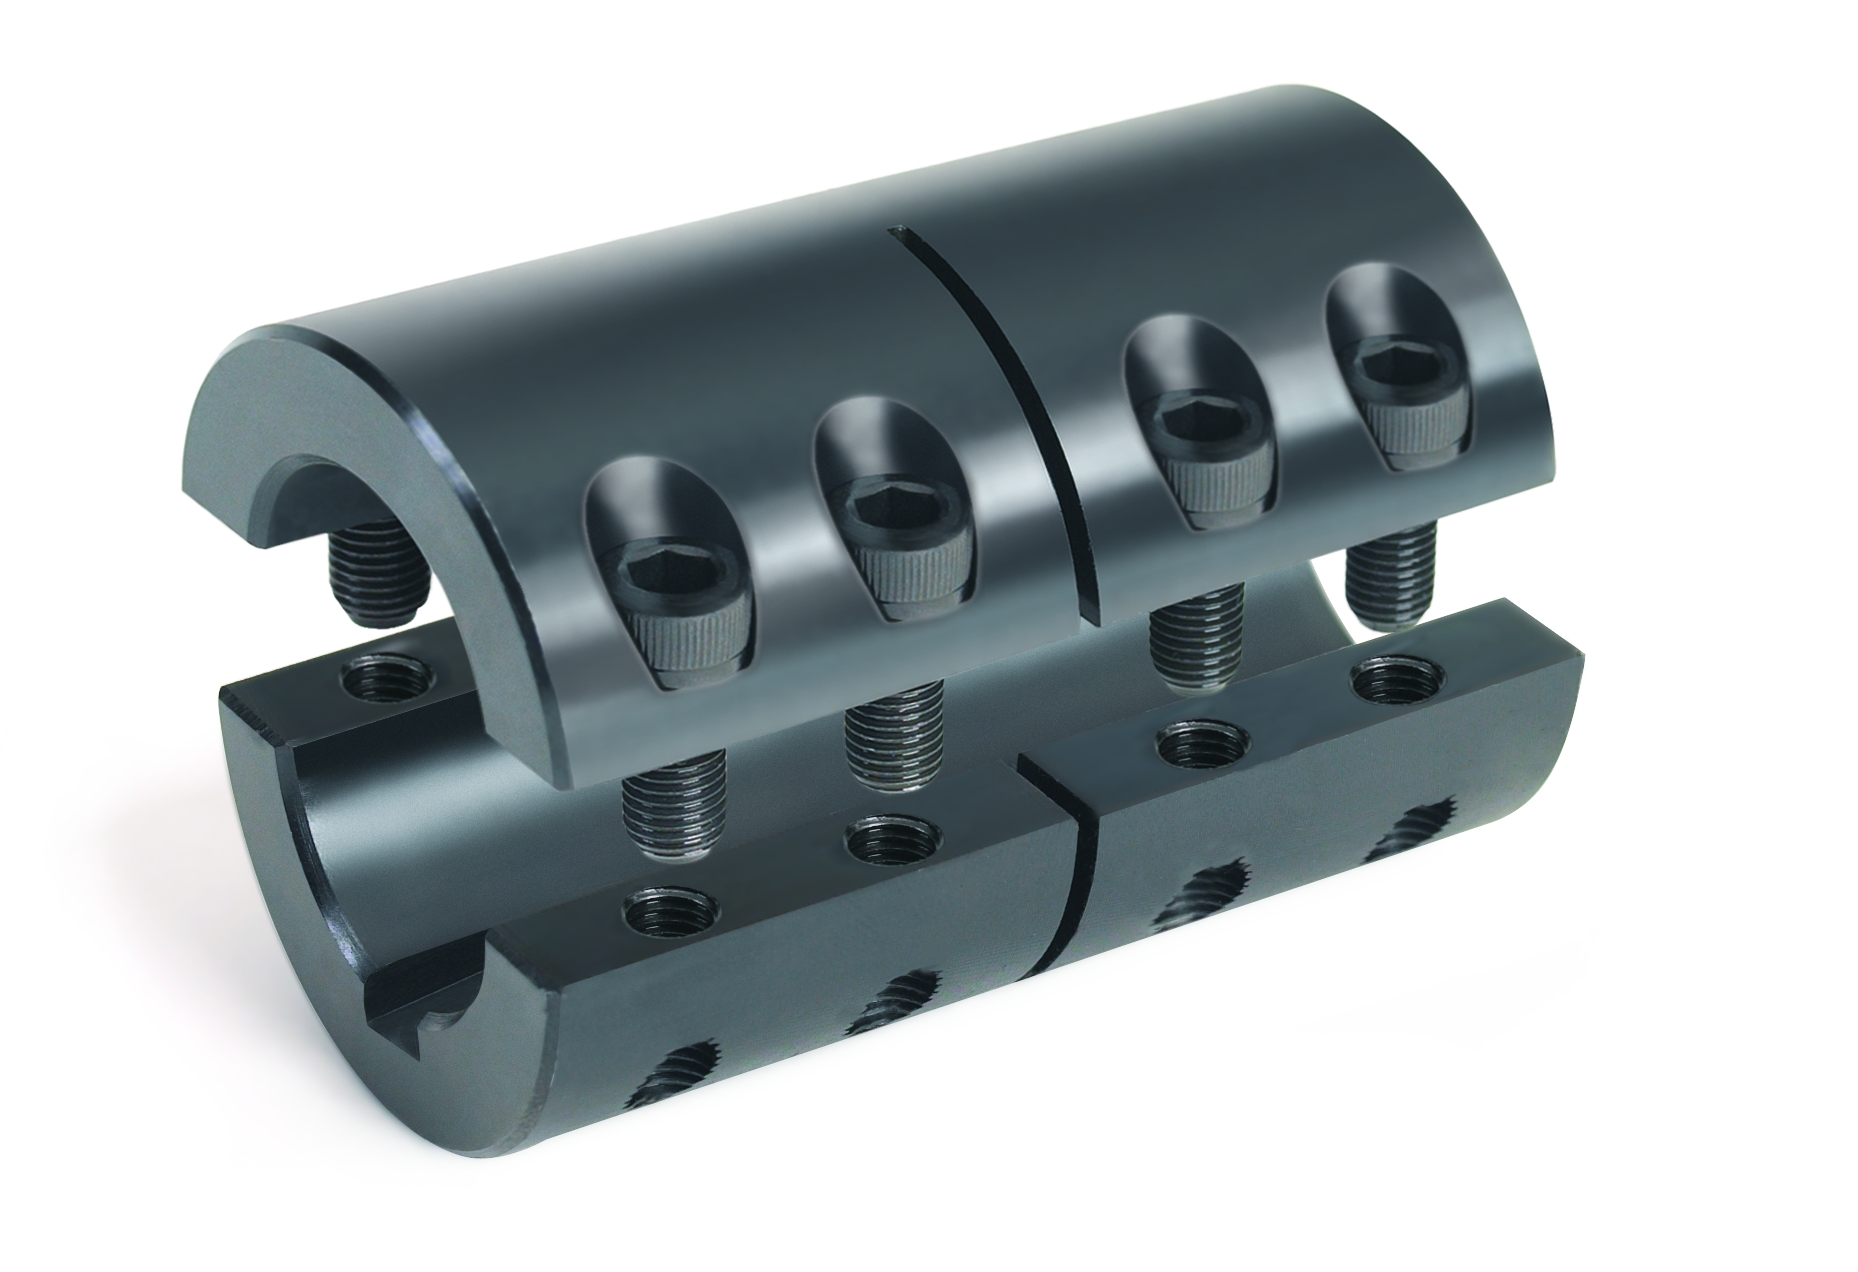 Metric Two-Piece Industry Standard Clamping Couplings w/Keyway 2MISCC-Series ASTM A108 Black Oxide Climax Metal Products 2MISCC-16-16-KW Side 1: 16 mm, Steel Bore 2MISCC Series 